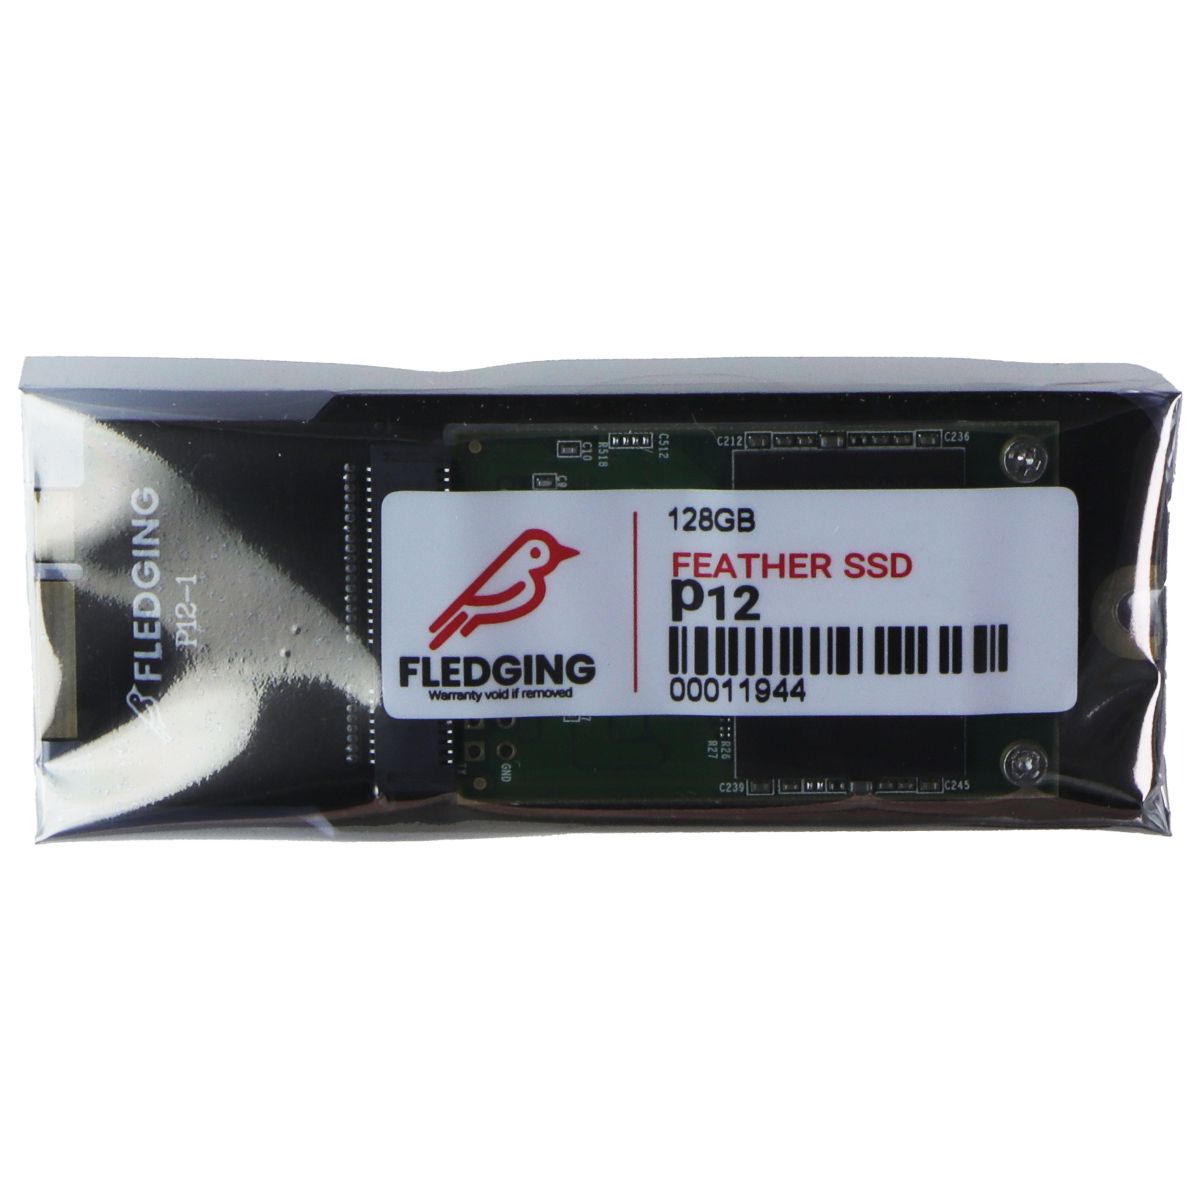 Fledging 128GB Feather P12 SATA 3 SSD Upgrade for MacBook Pro 2012 - 2013 Digital Storage - Solid State Drives Fledging    - Simple Cell Bulk Wholesale Pricing - USA Seller